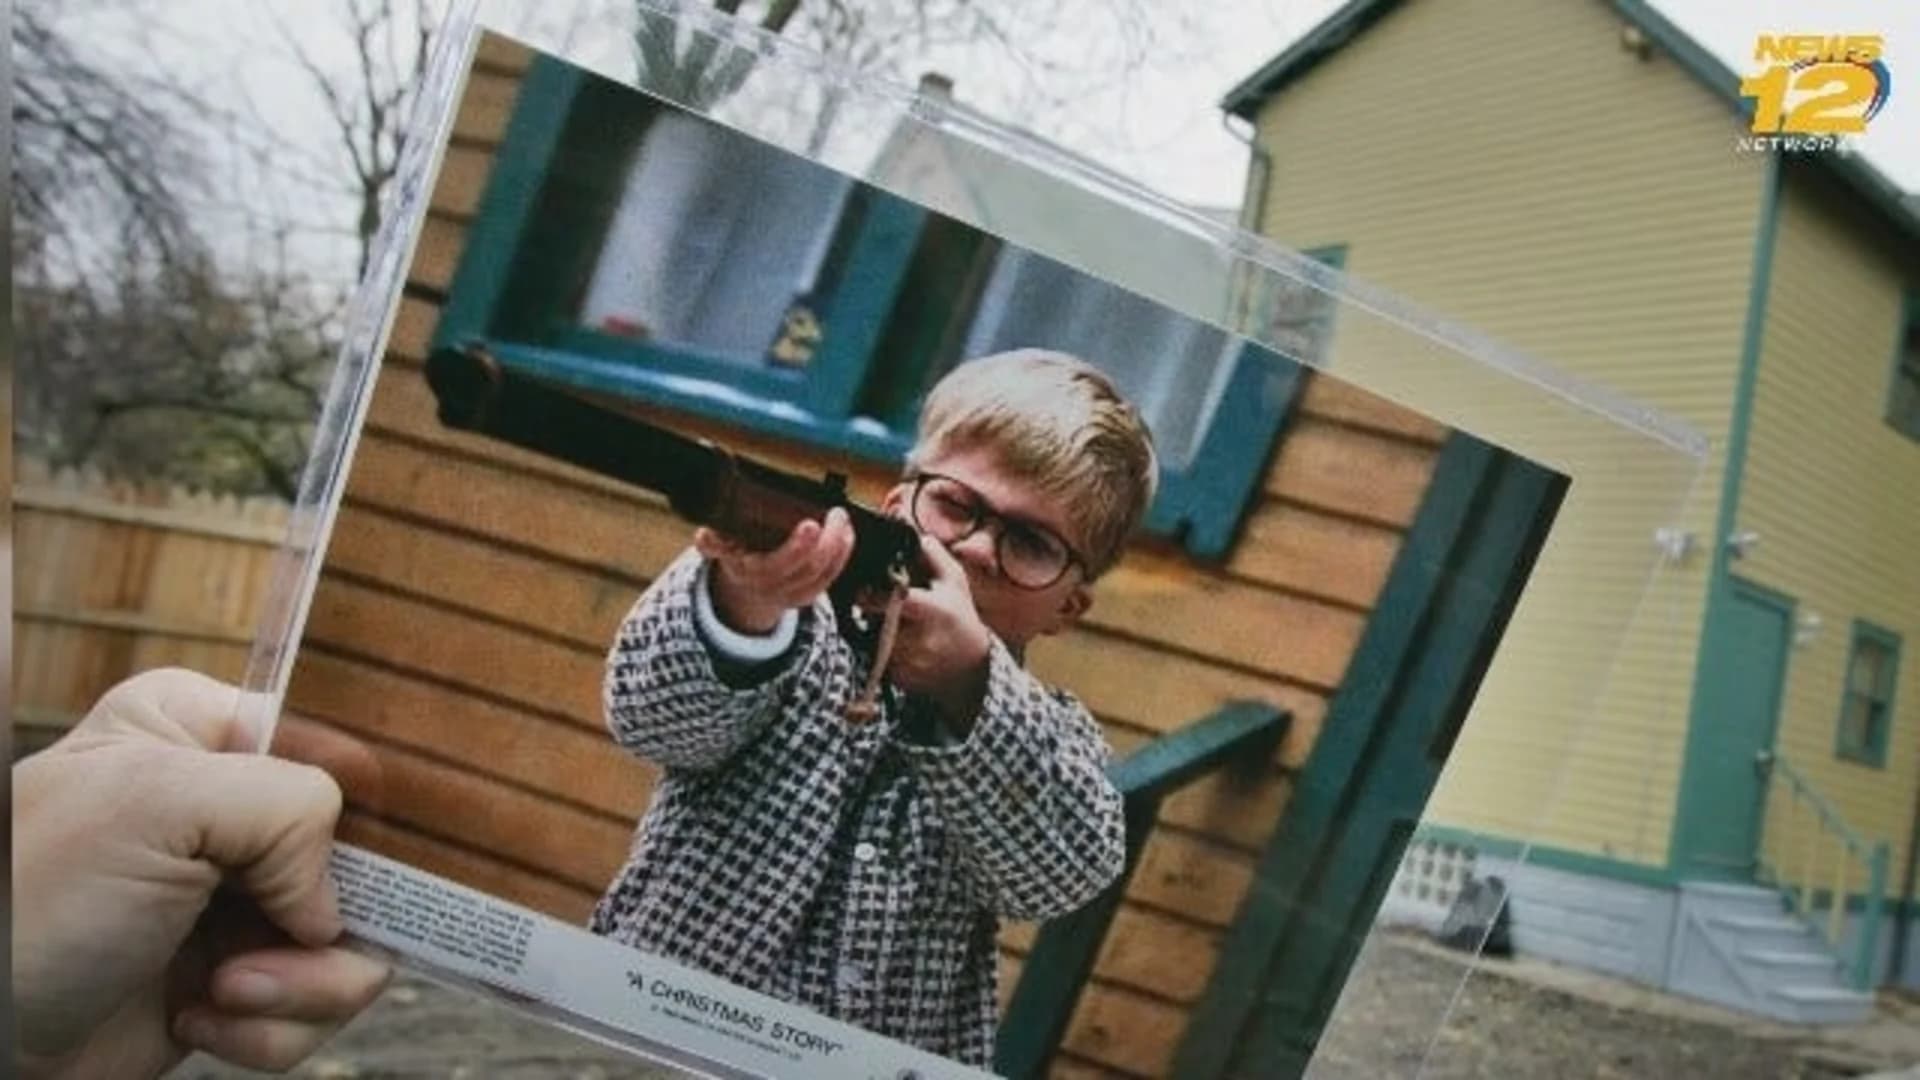 ‘I Triple-Dog-Dare You!’ Stay at the “A Christmas Story” house